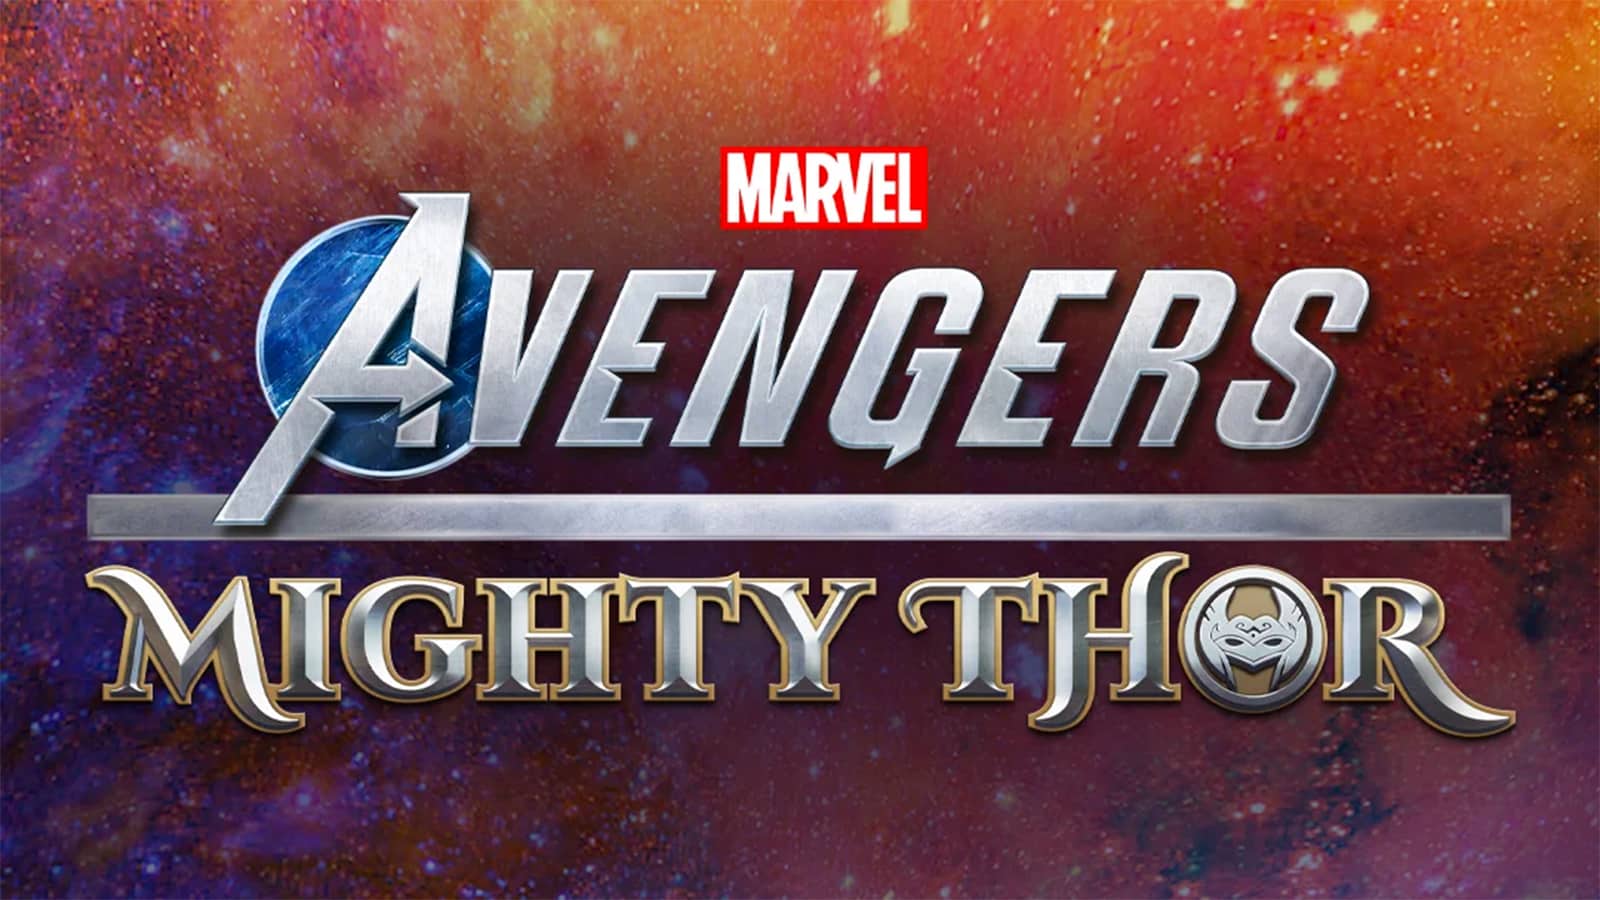 A poster for Mighty Thor in Marvel's Avengers